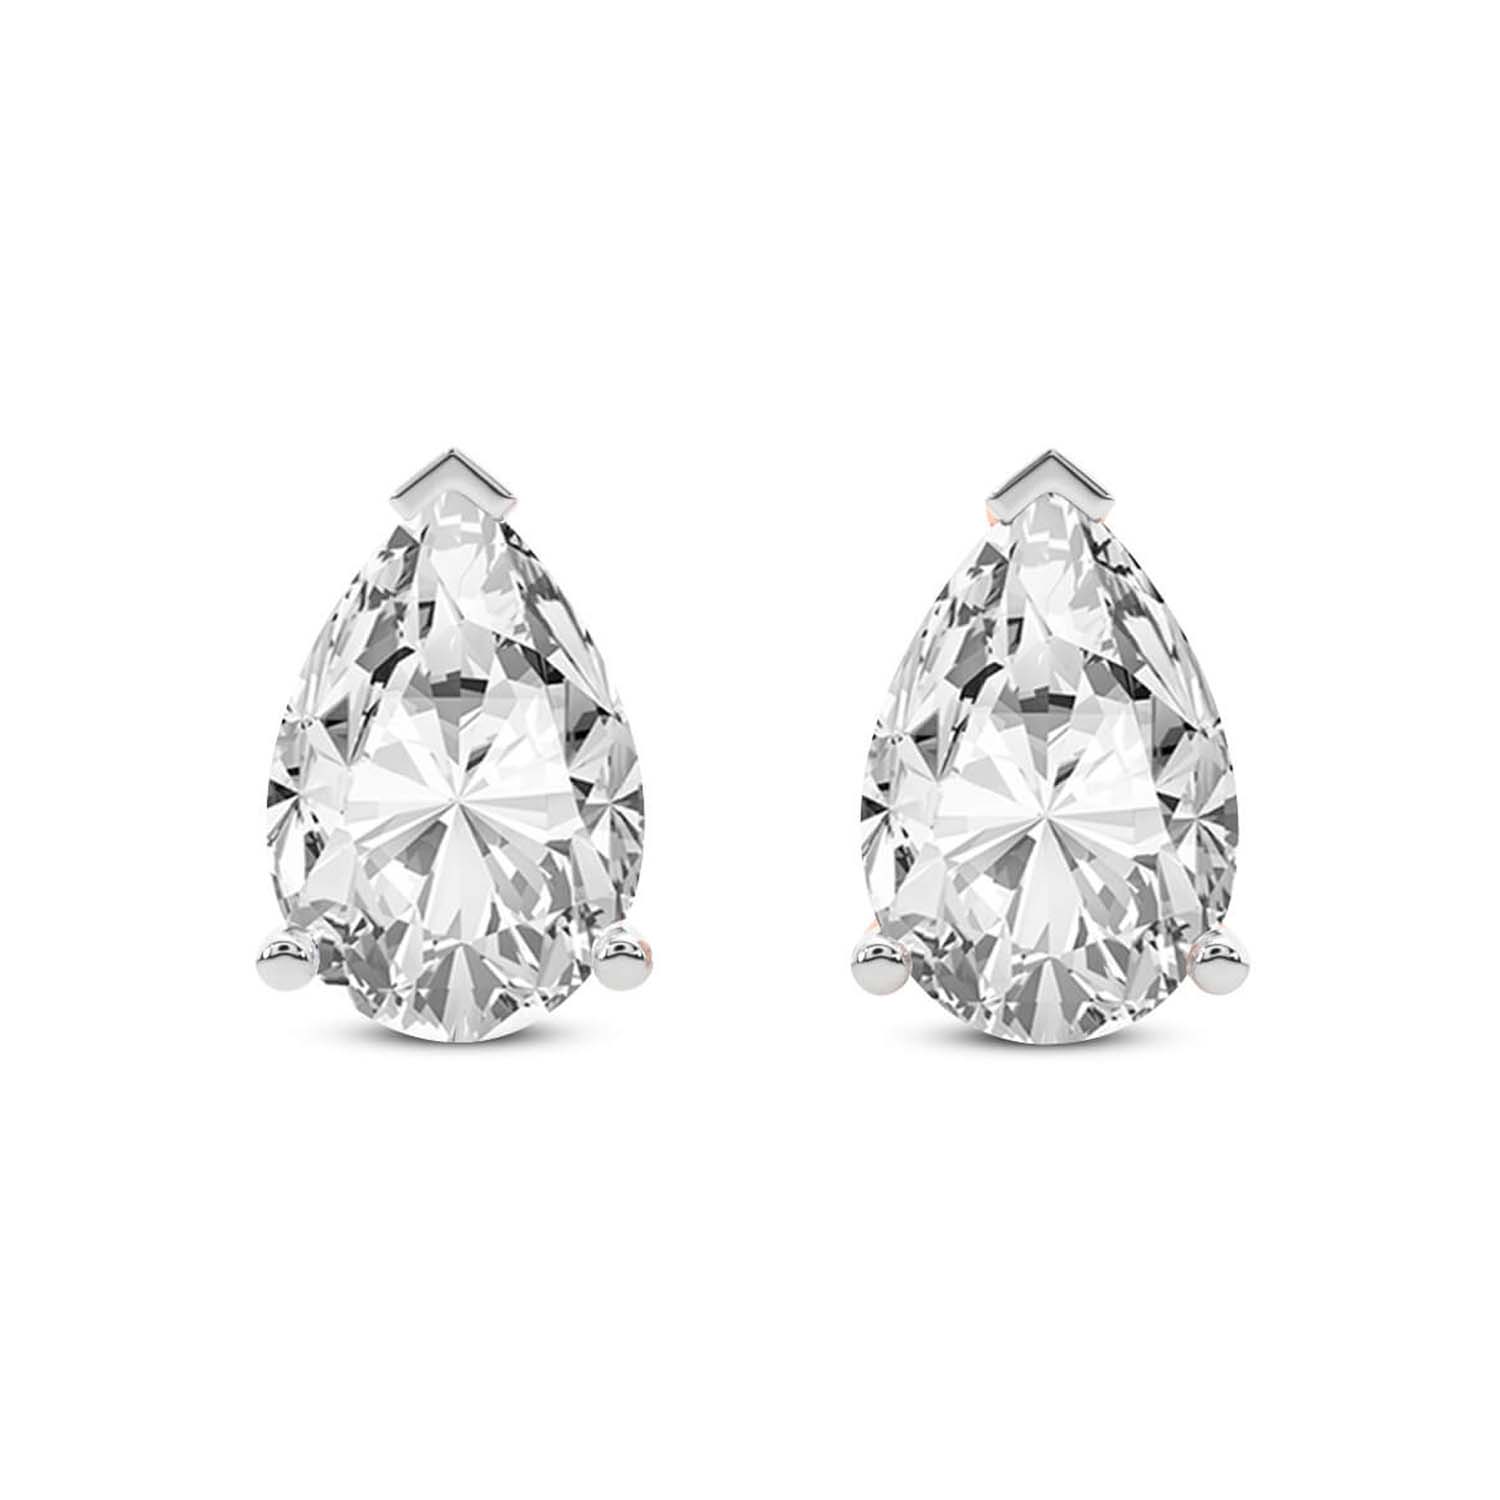 3 Prong Pear Lab Diamond Stud Earrings yellow gold earring, small front view